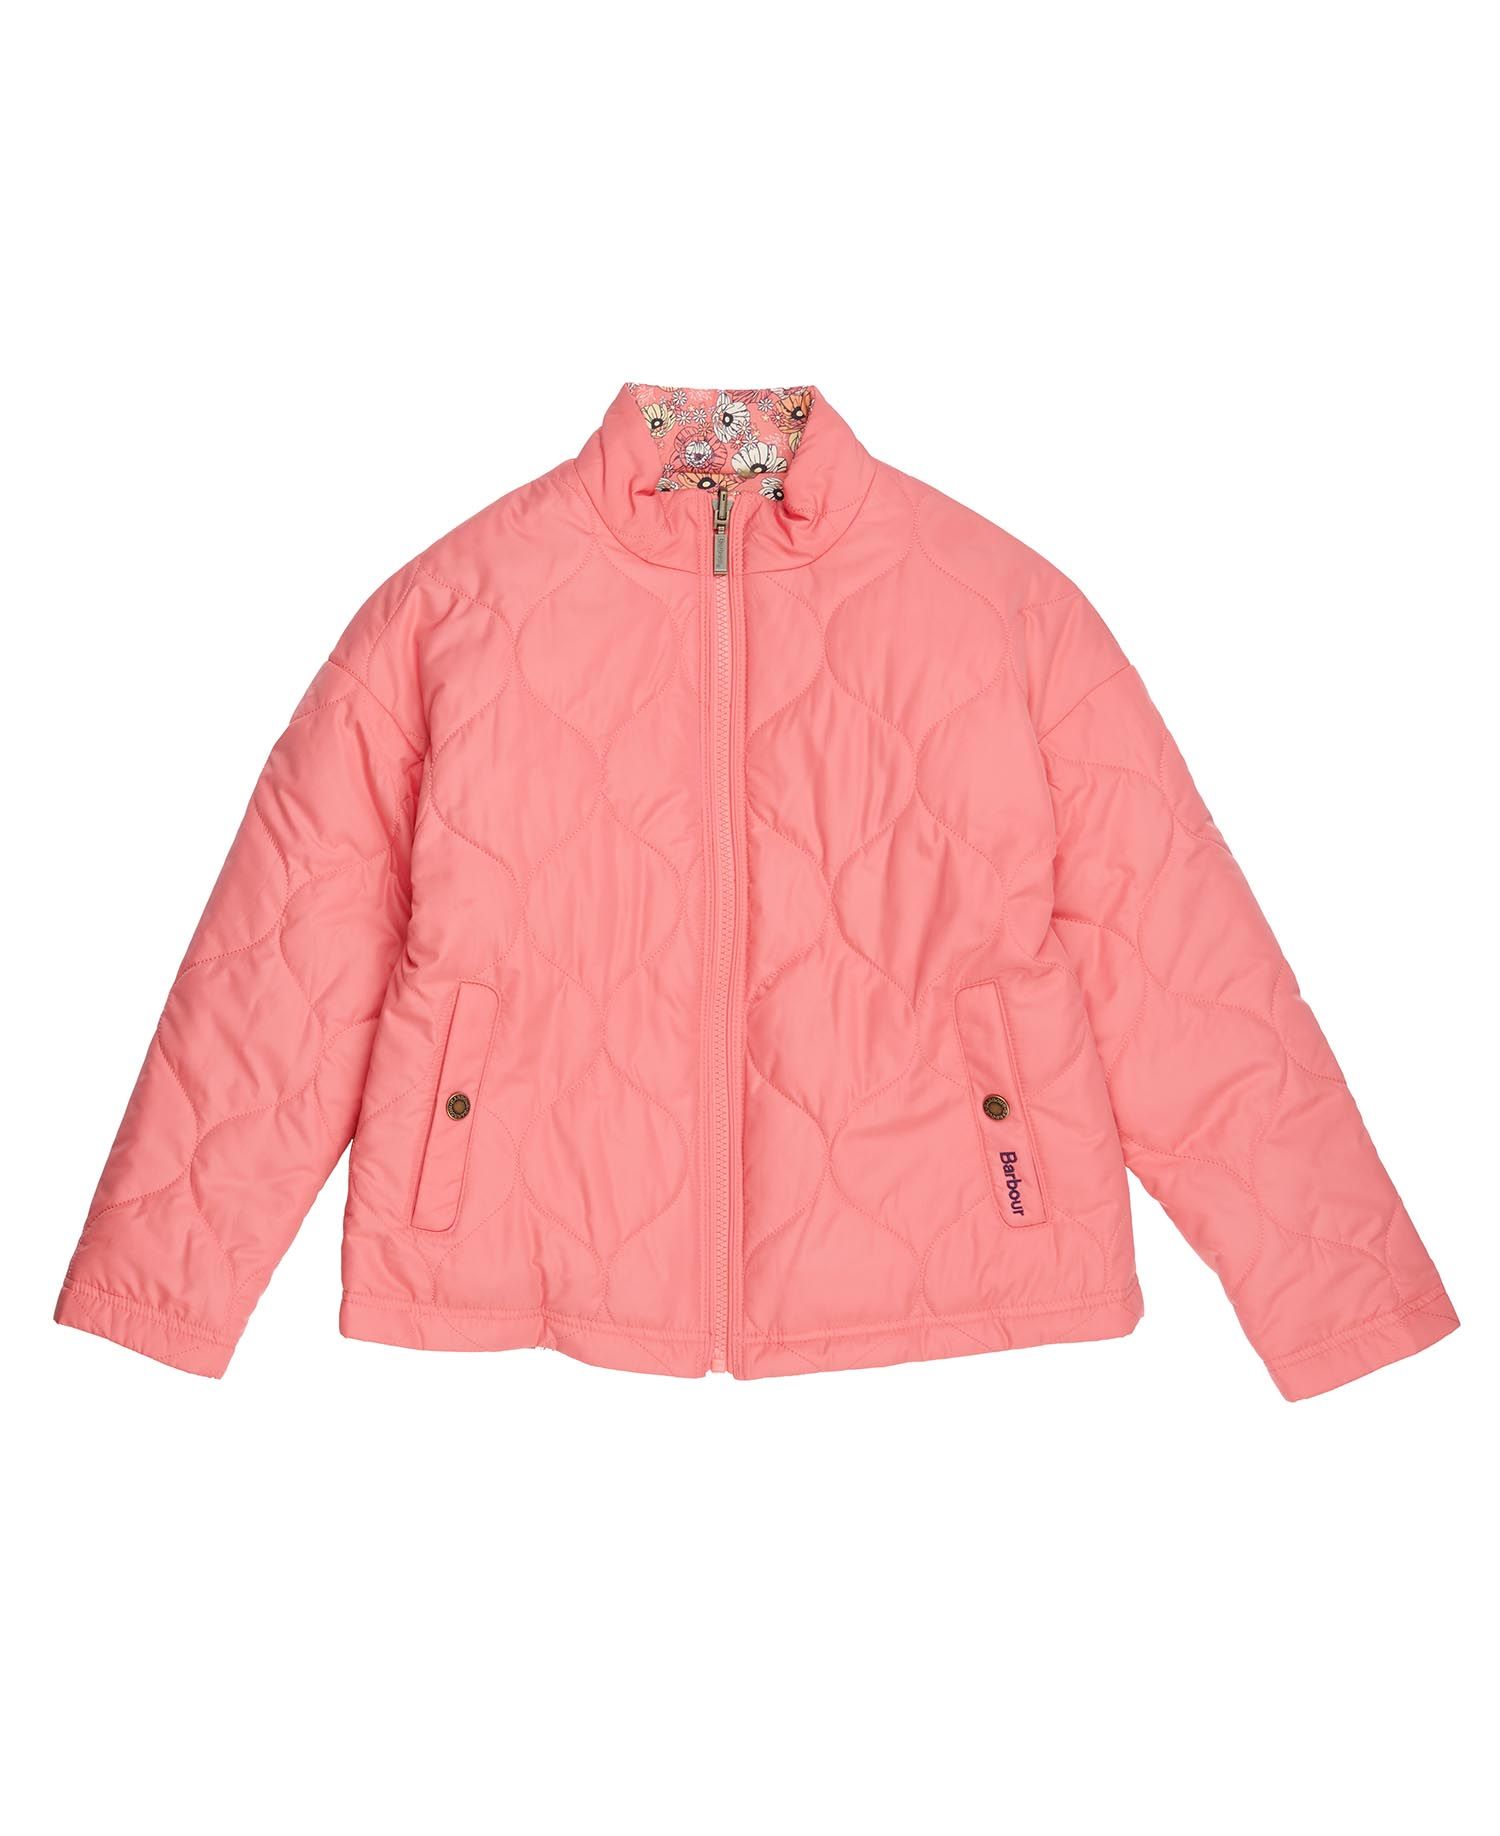 Barbour Girls Reversible Quilted Jacket